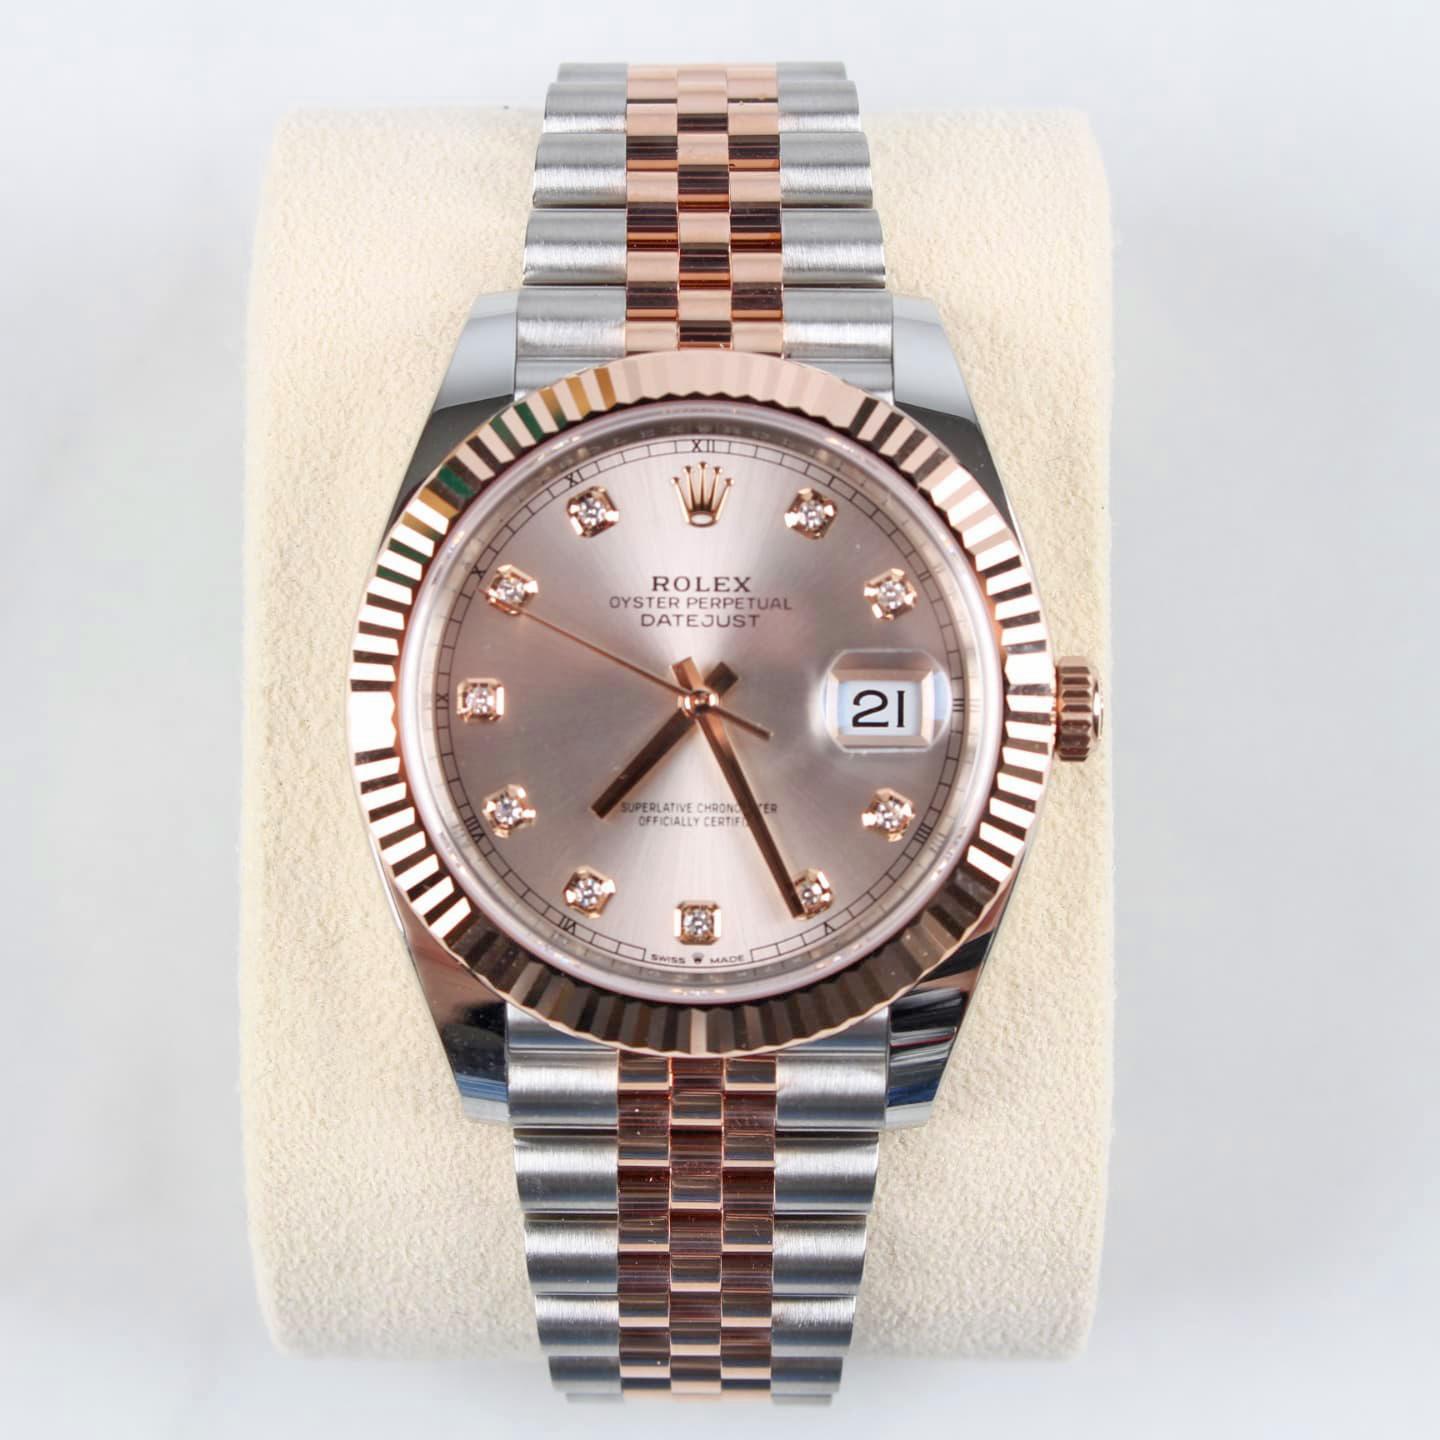 Rolex Datejust 41 watch with polished 18k Everose Gold and Stainless Steel case, Reference 126331-0008. This model has Sundust dial with a fine sunray. The dial is adorned with polished 18k Everose Gold hands and Hour markers are 10 Diamonds in 18k